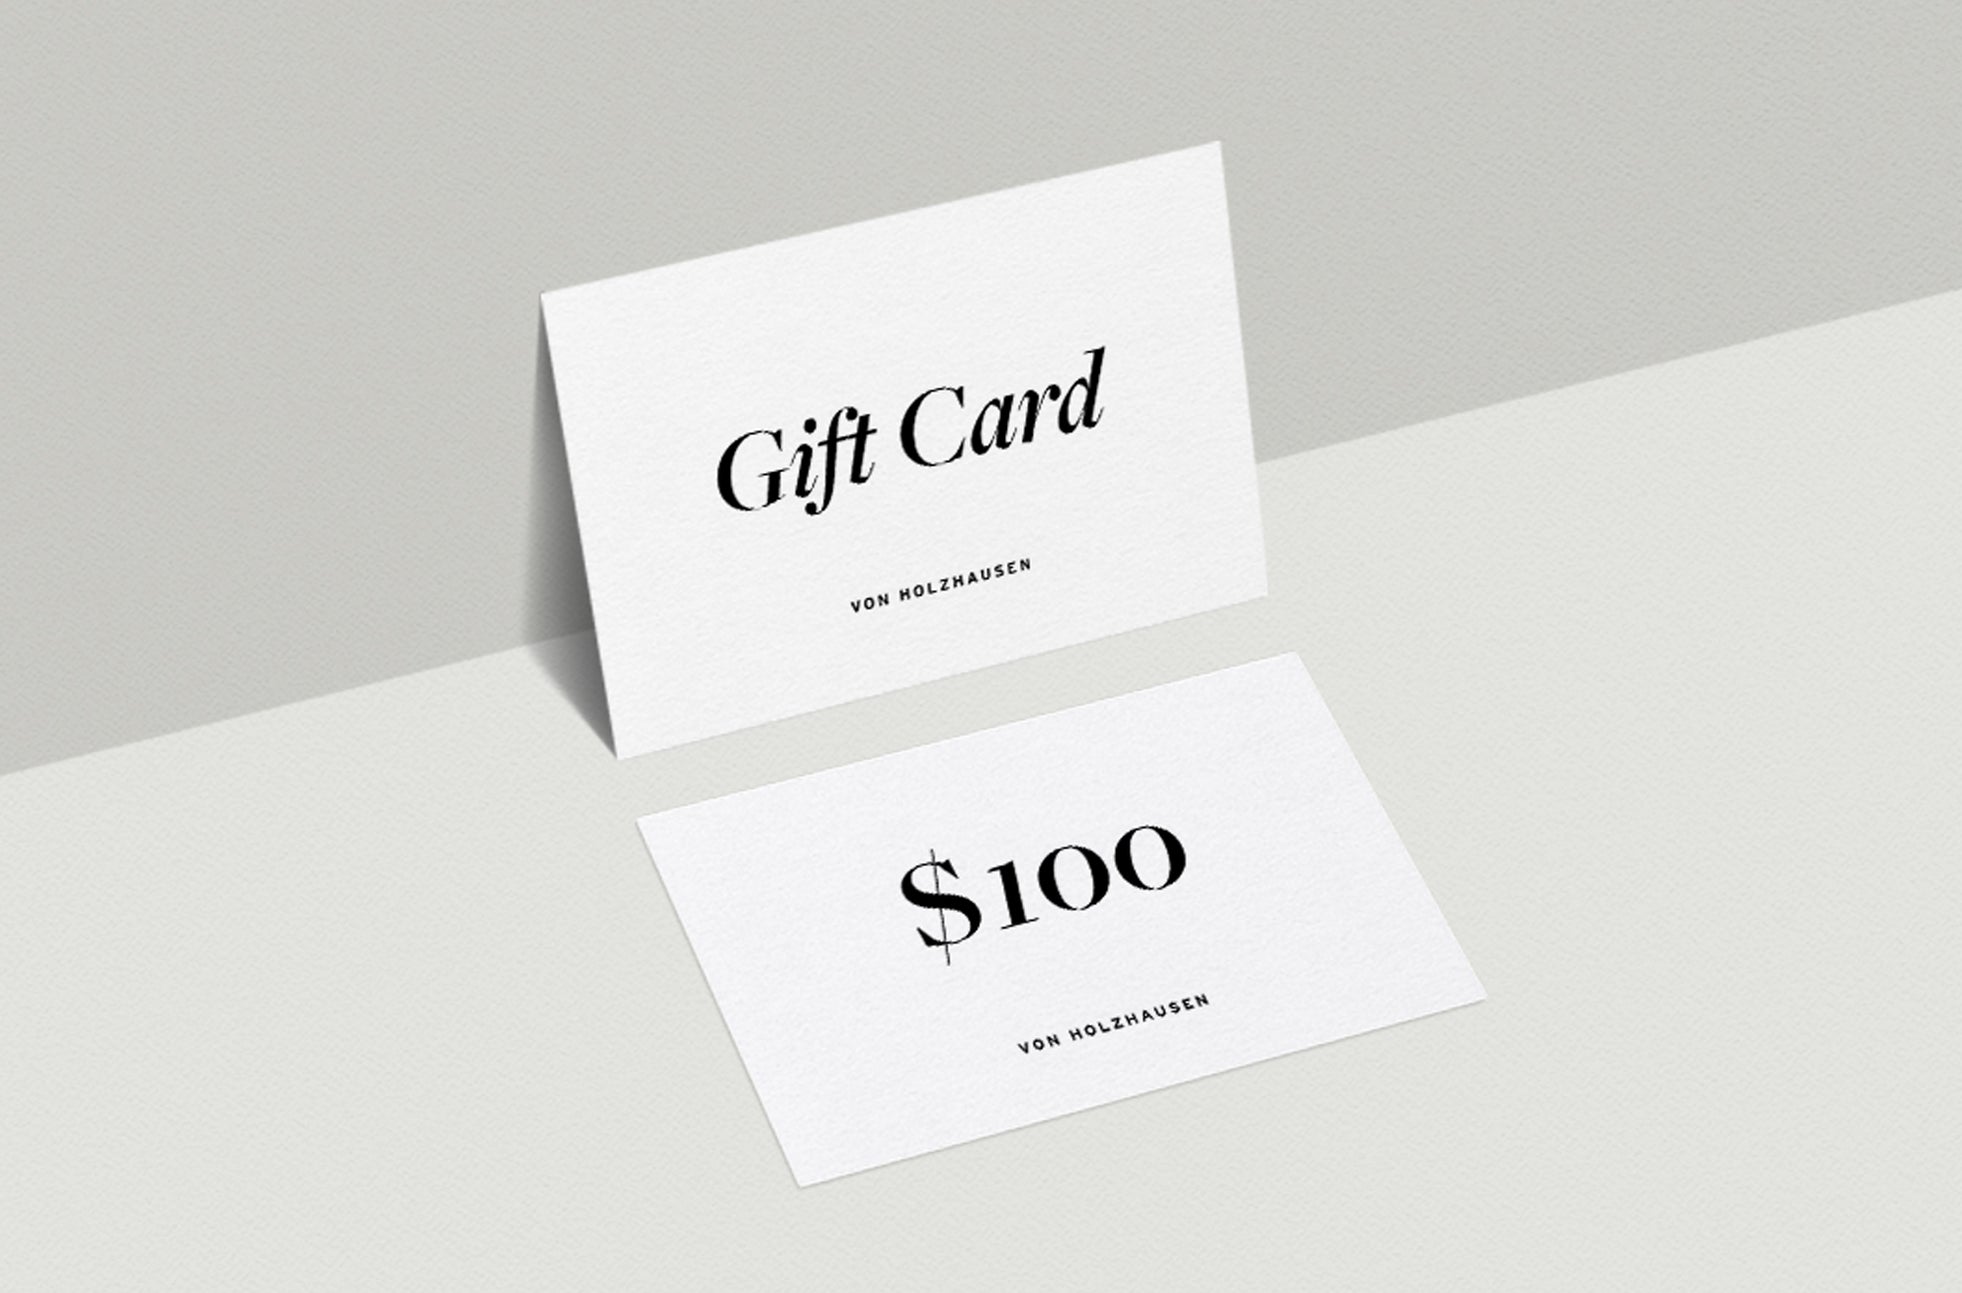 The Gift Card in Virtual Gift Card image 1